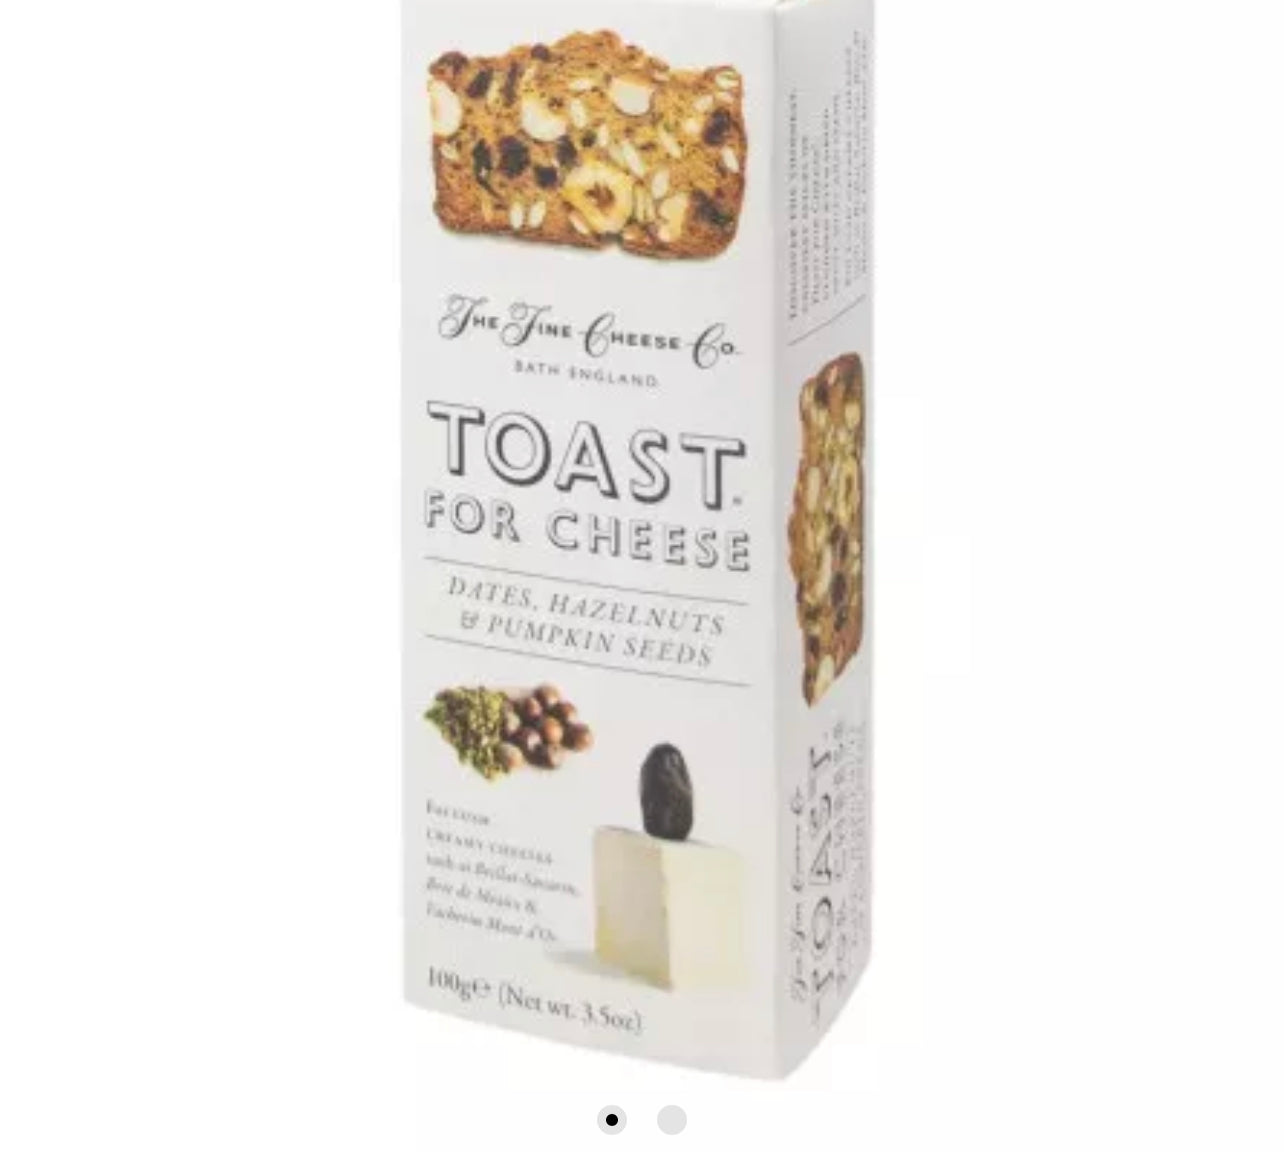 Toast For Cheese® dates, hazelnuts and pumpkin seeds - 100g